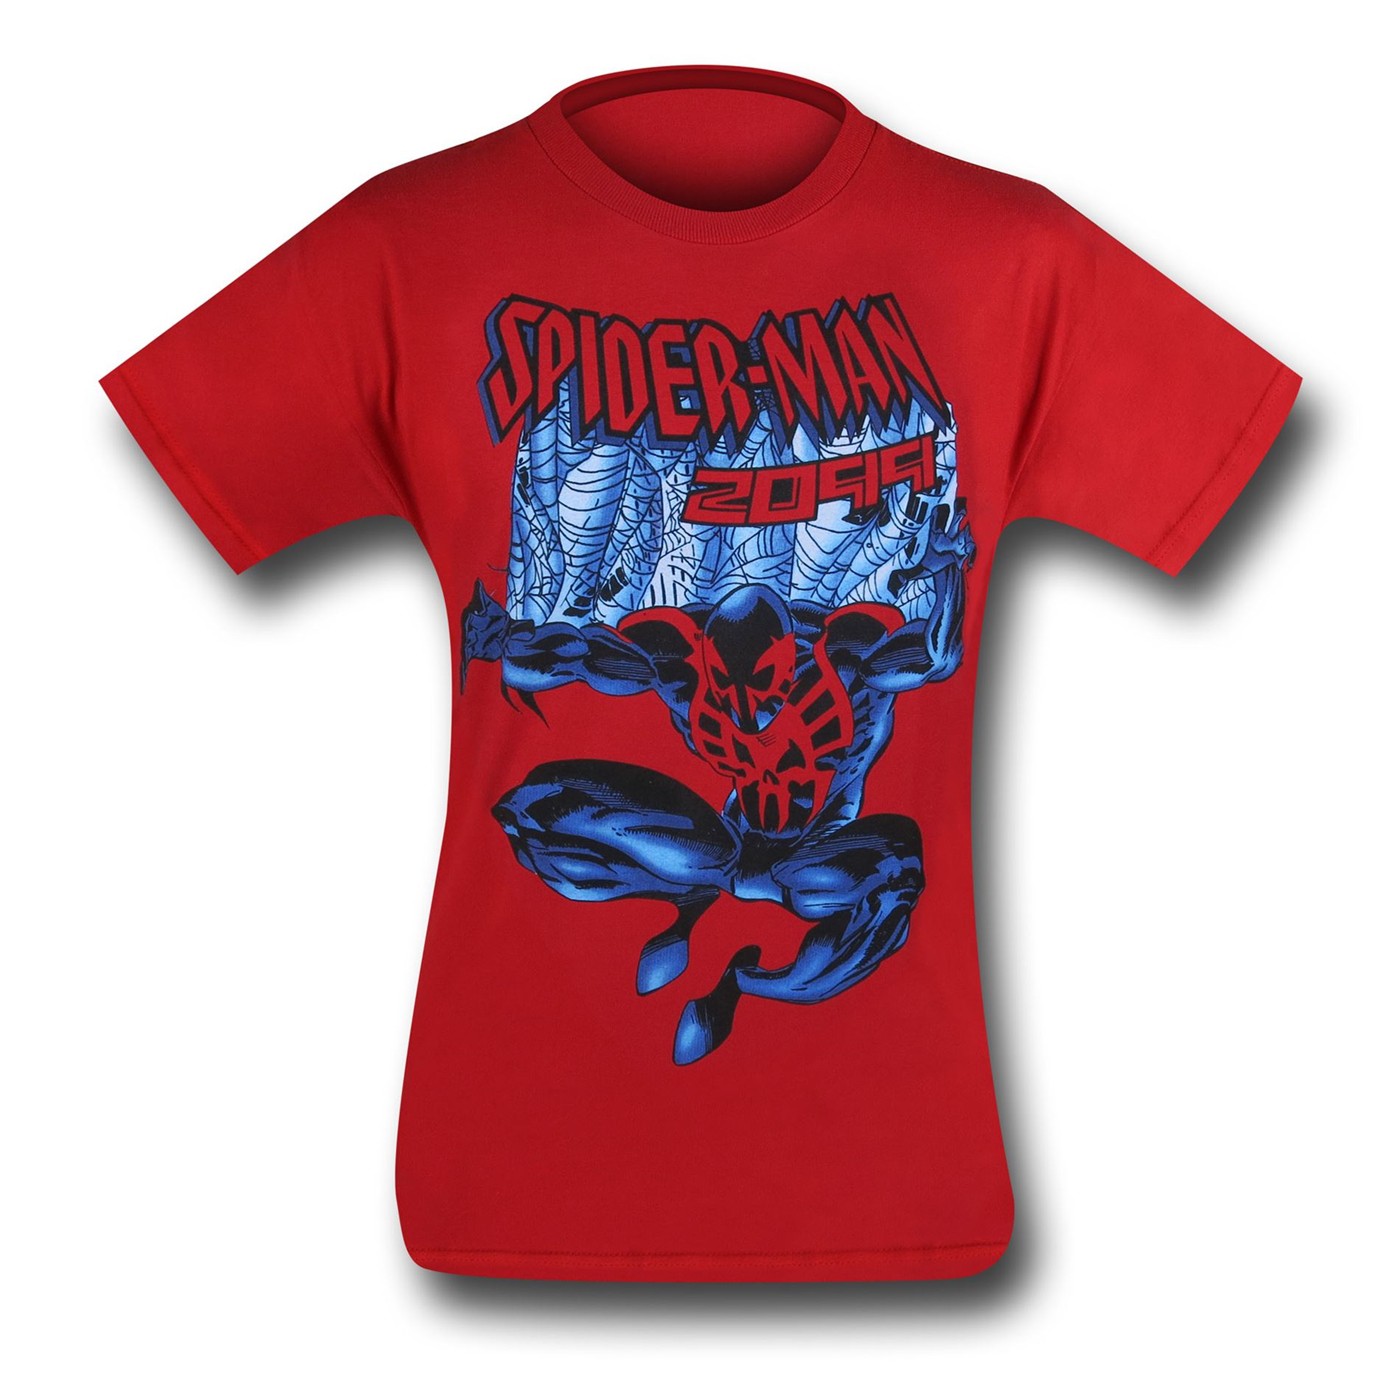 Spiderman 2099 on Red 30 Single T-Shirt